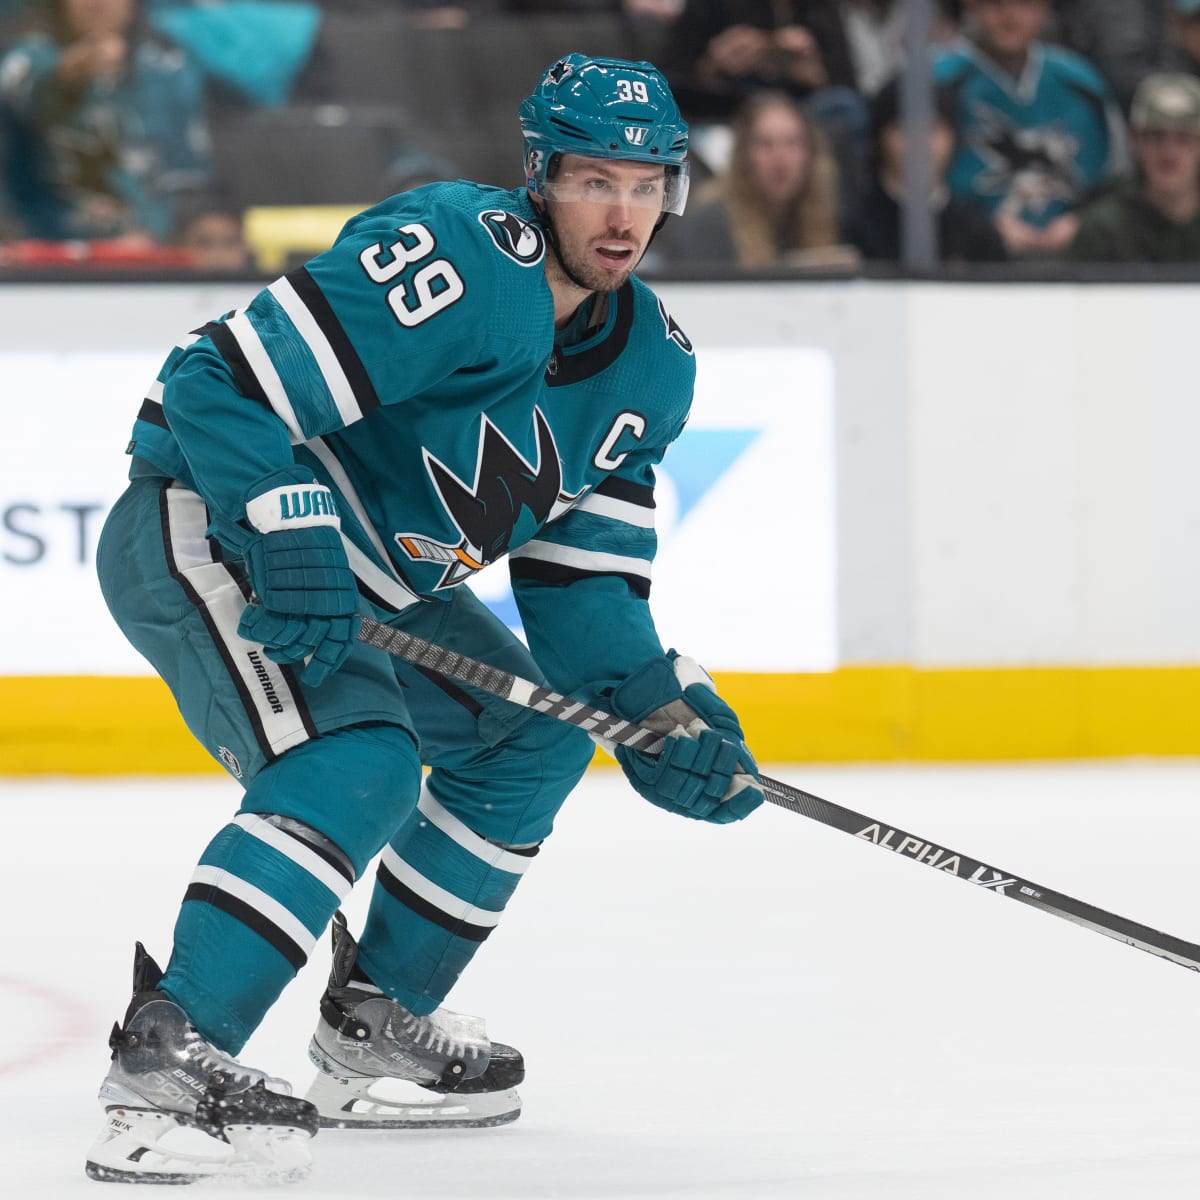 San Jose Sharks 2022-23 season preview: Playoff chances, projected points,  roster rankings - The Athletic